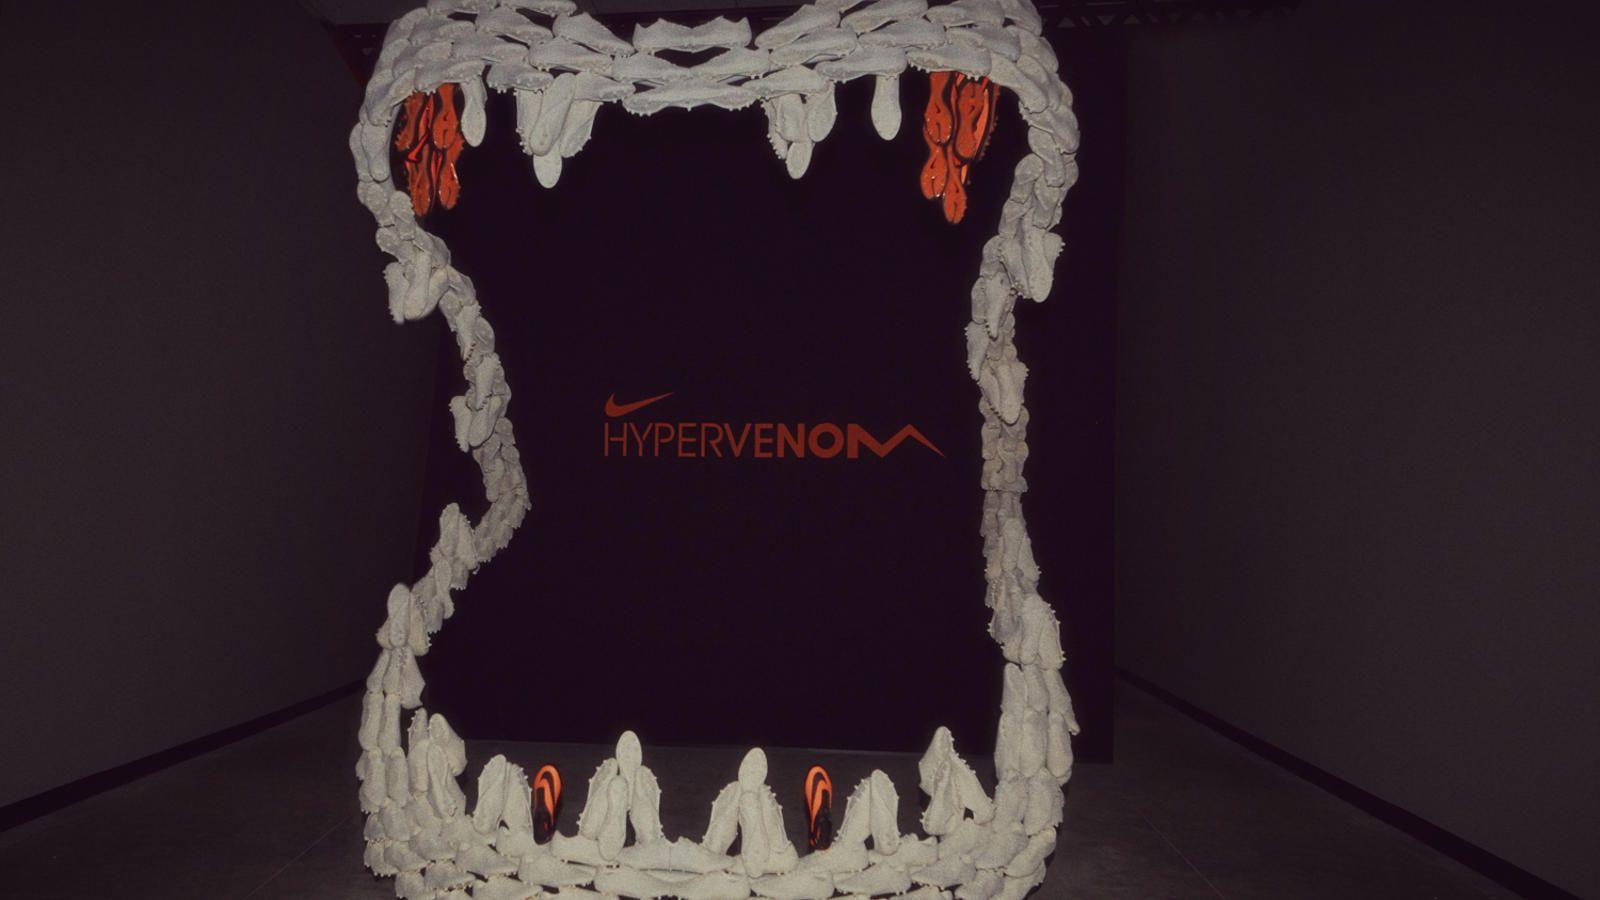 Nike News is a New Breed of Attacker in Hypervenom Boots